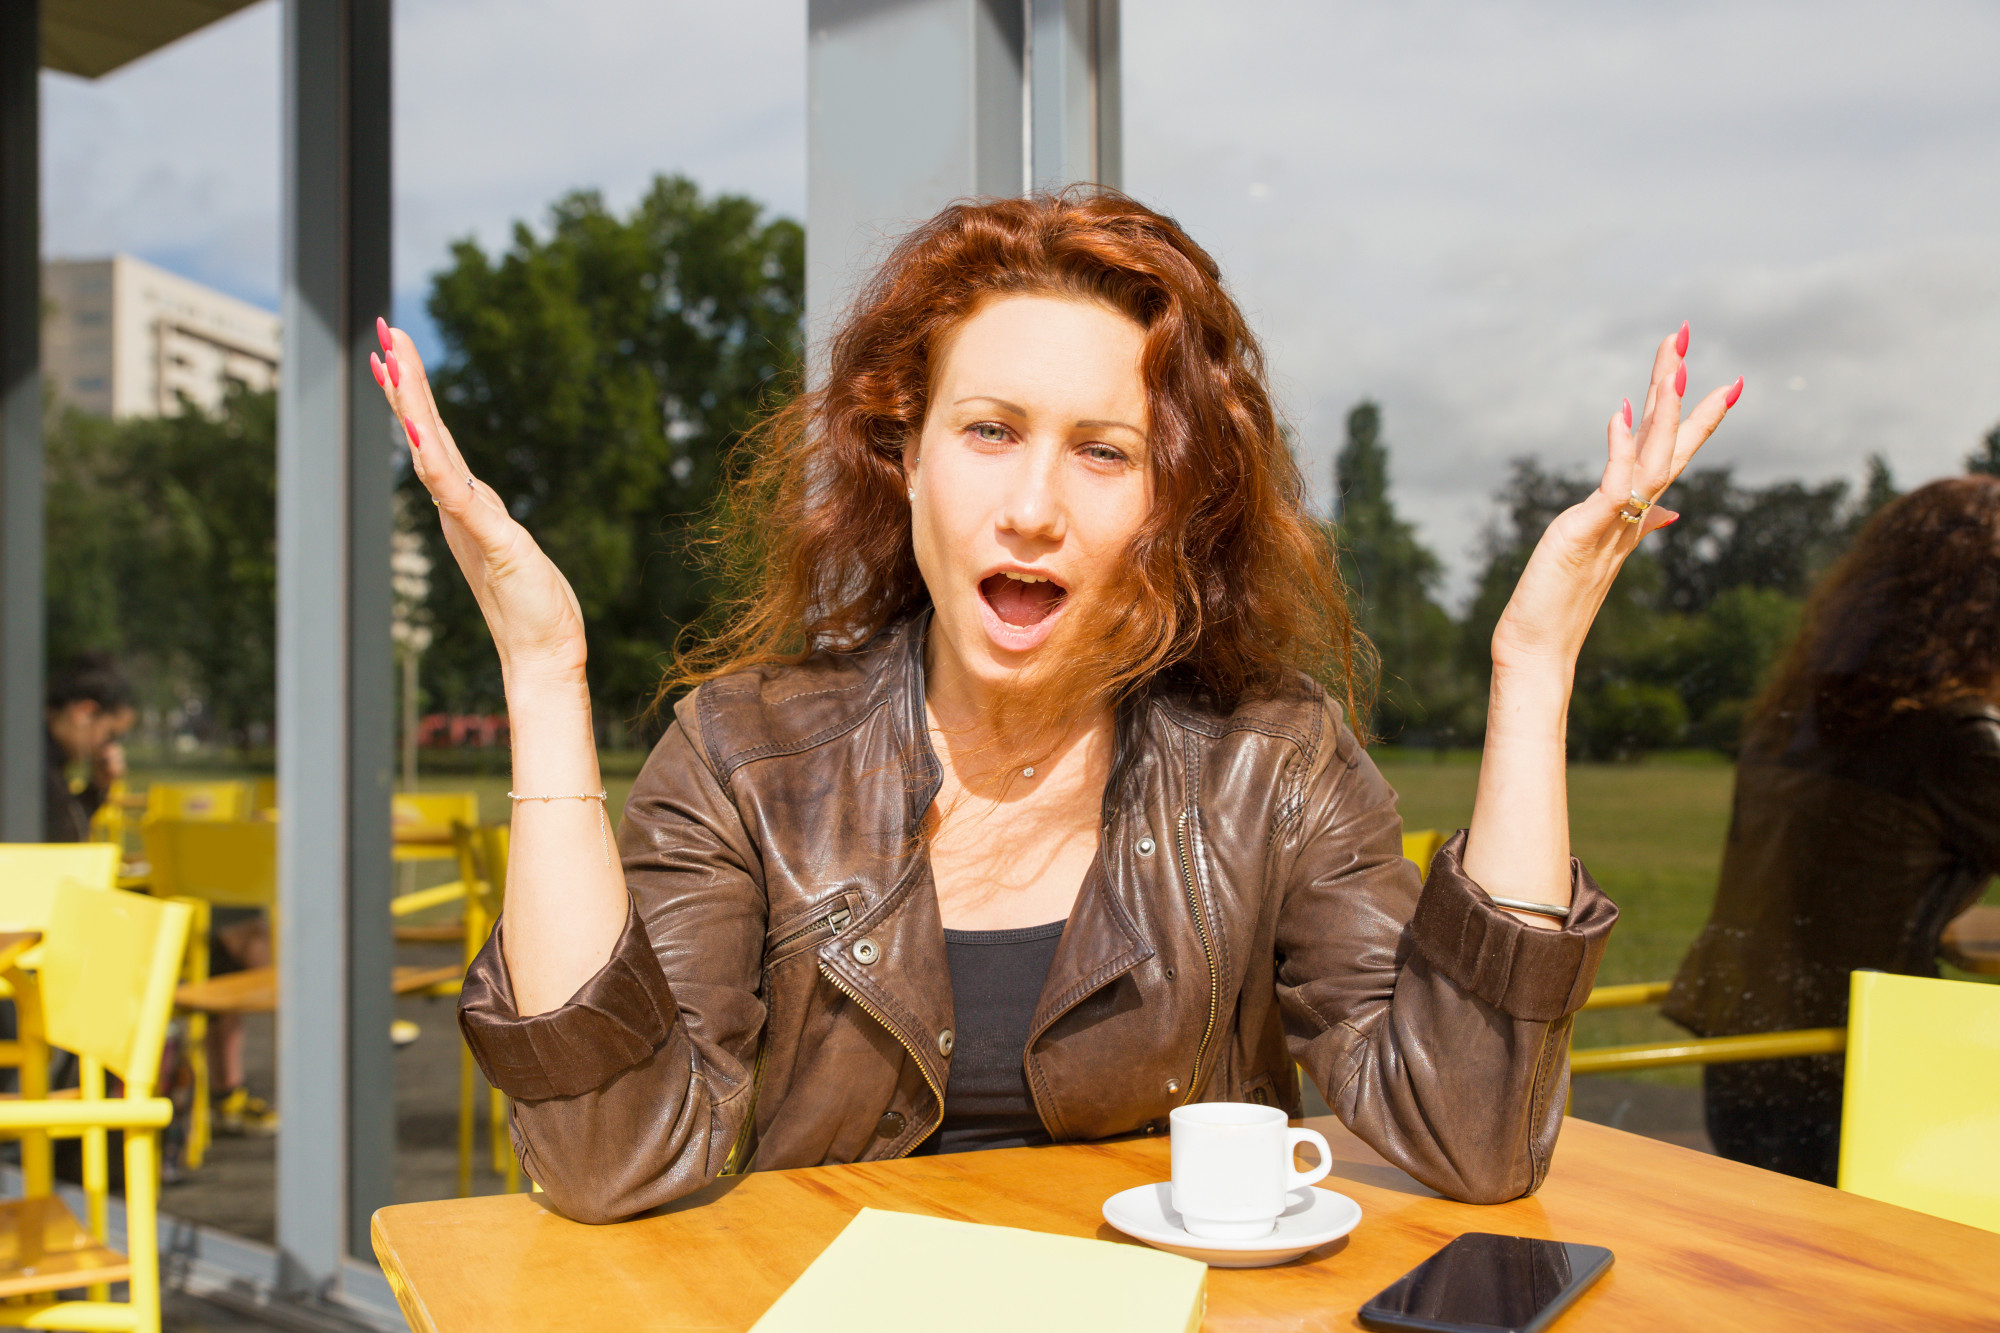 An upset woman gesturing with her hands while talking to someone at a restaurant | Source: Freepik